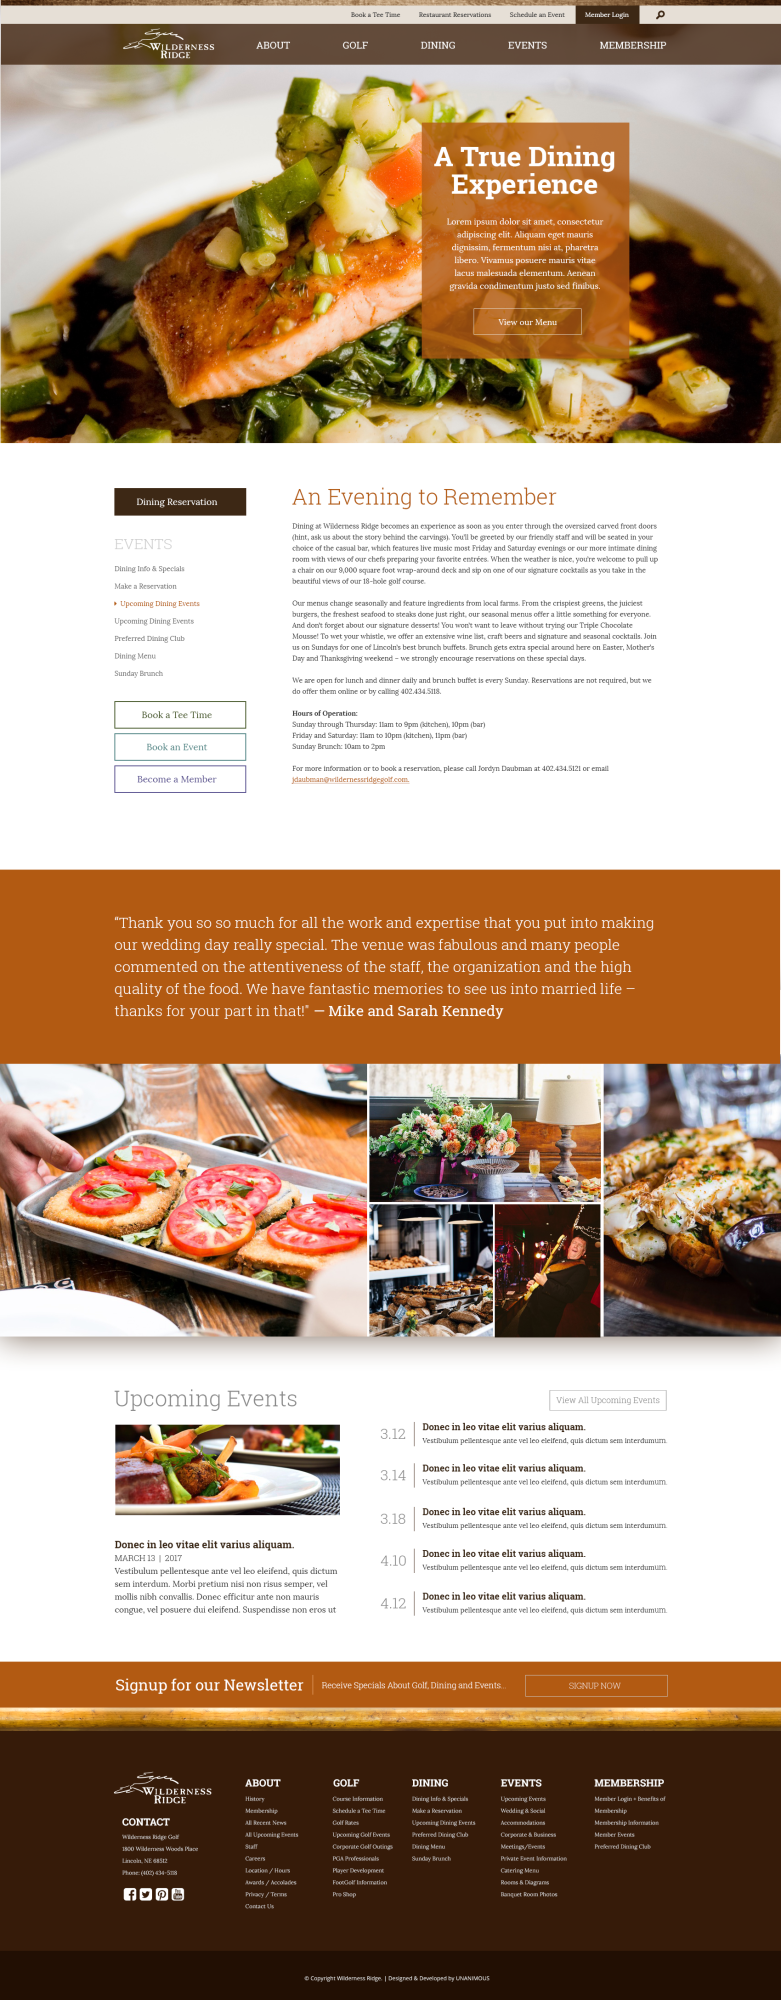 country club website design restaurant page